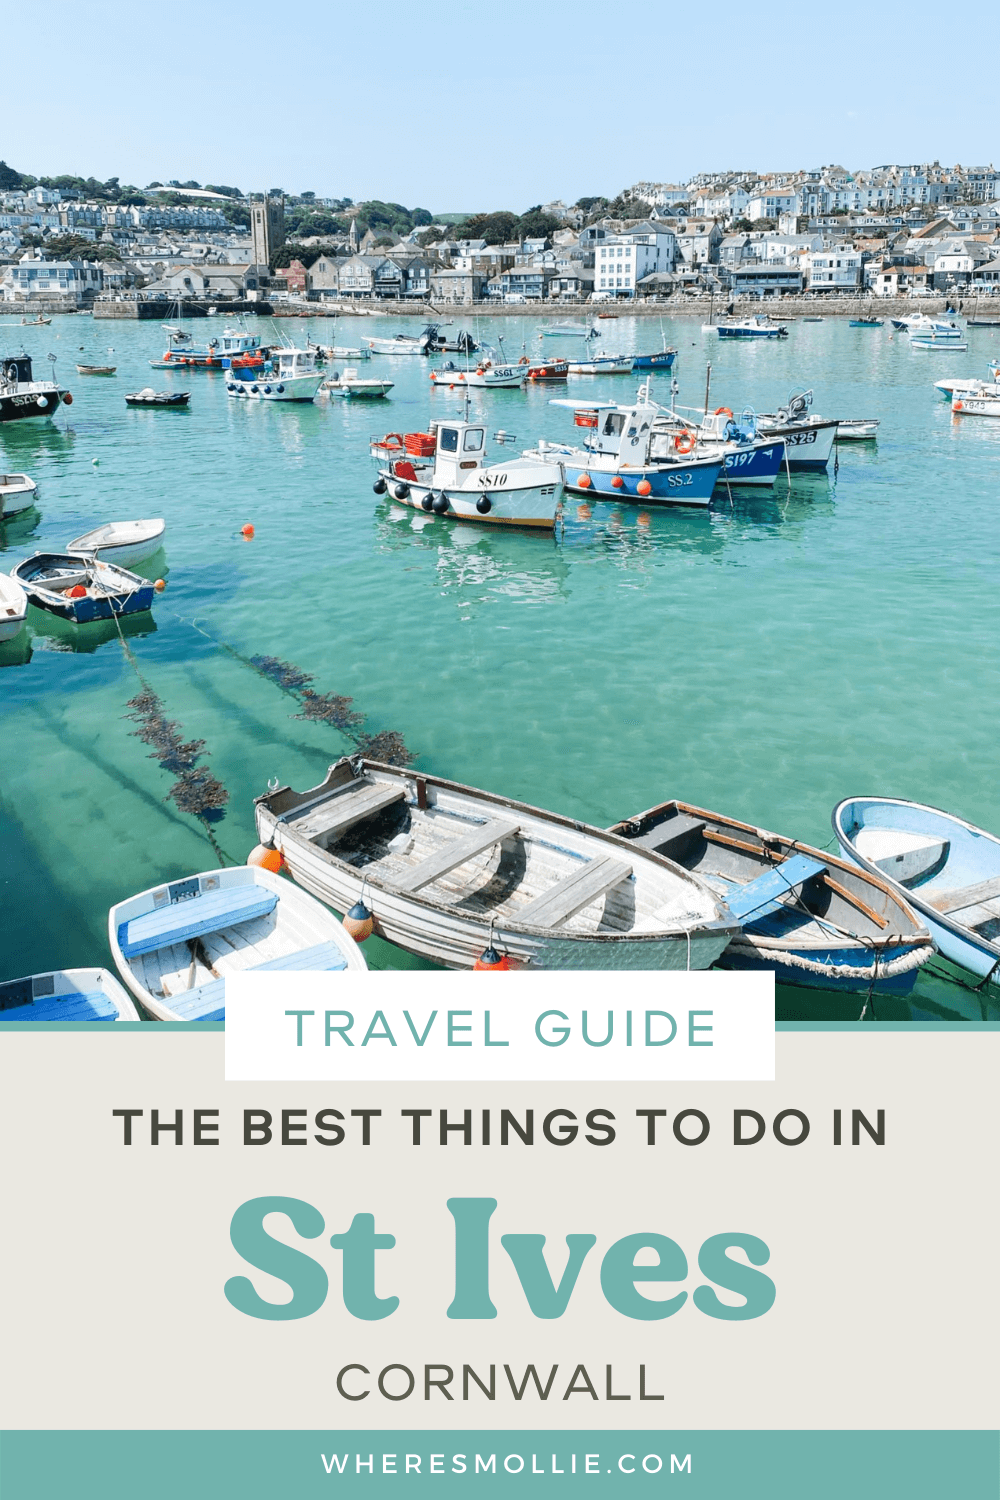 The best things to do in St. Ives, Cornwall